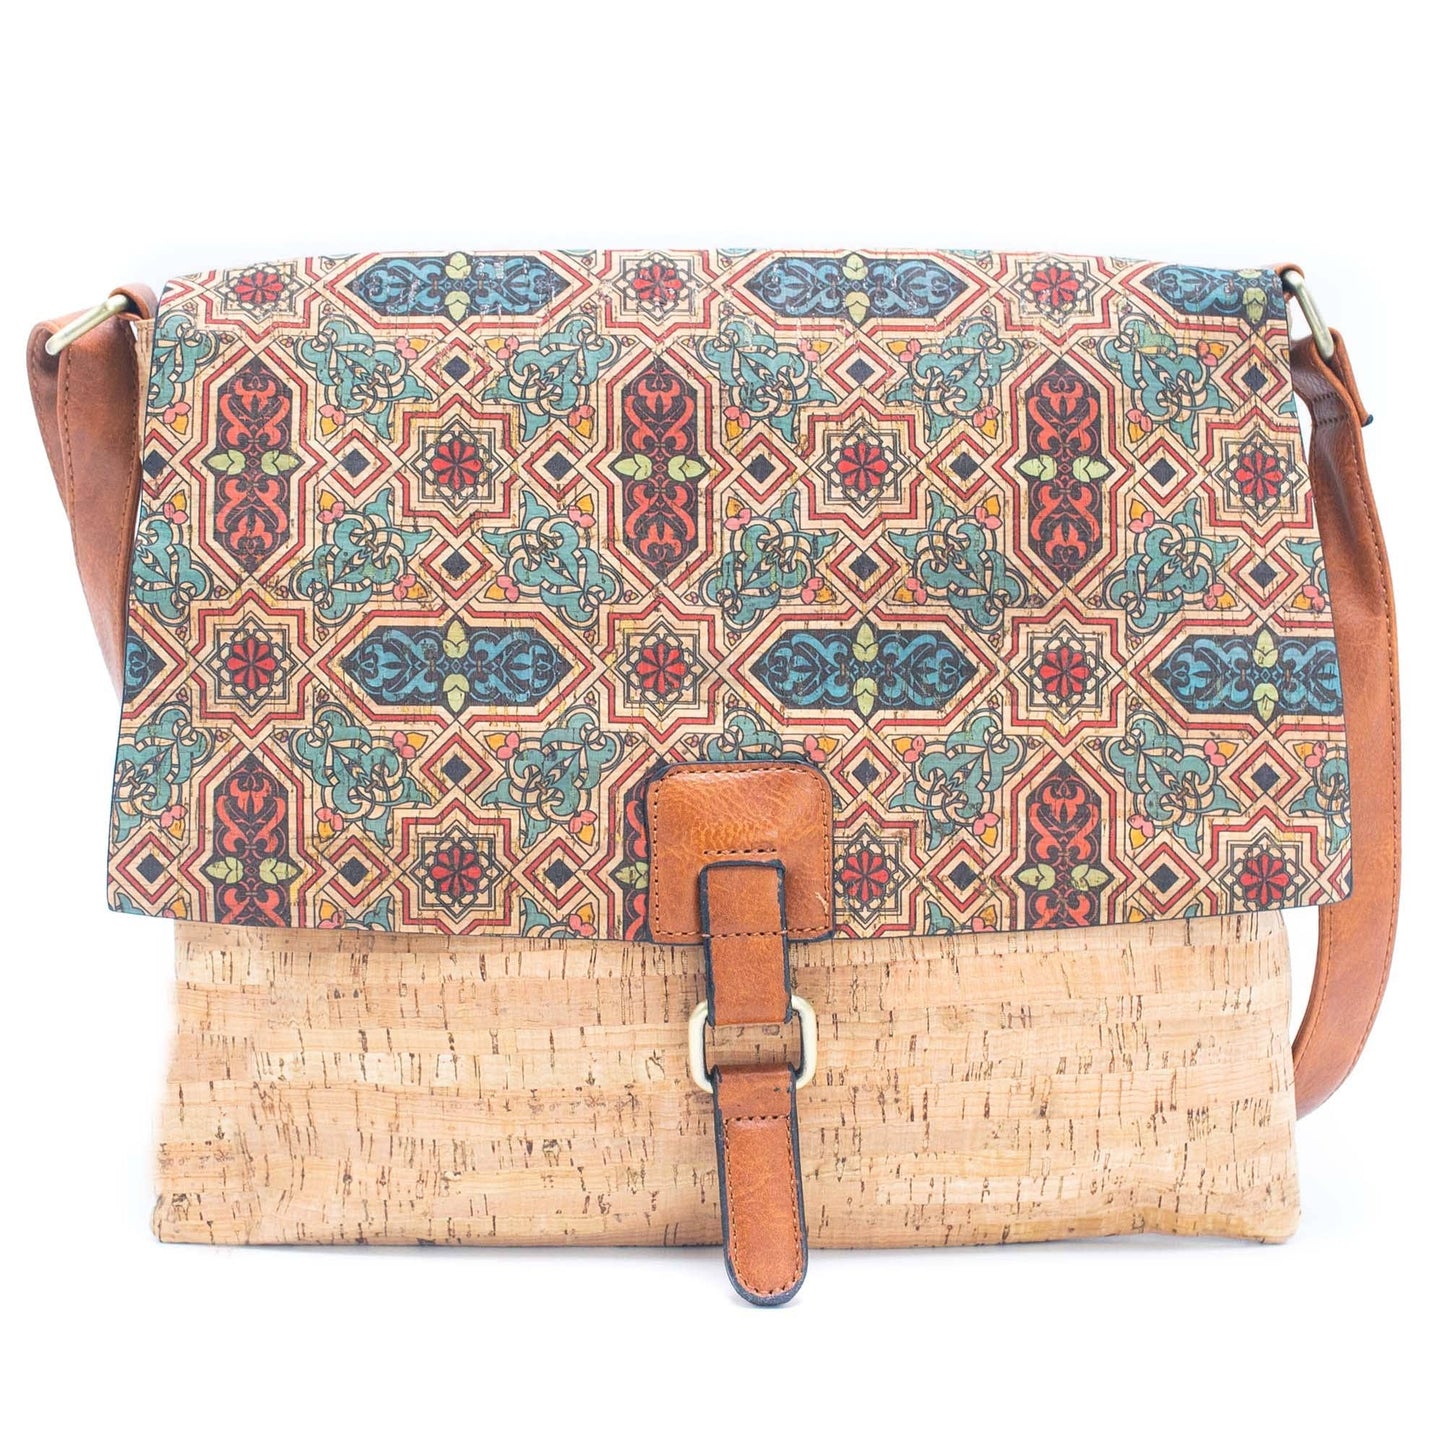 Cork Crossbody Bag with Mosaic and Floral Prints BAGD-464-13